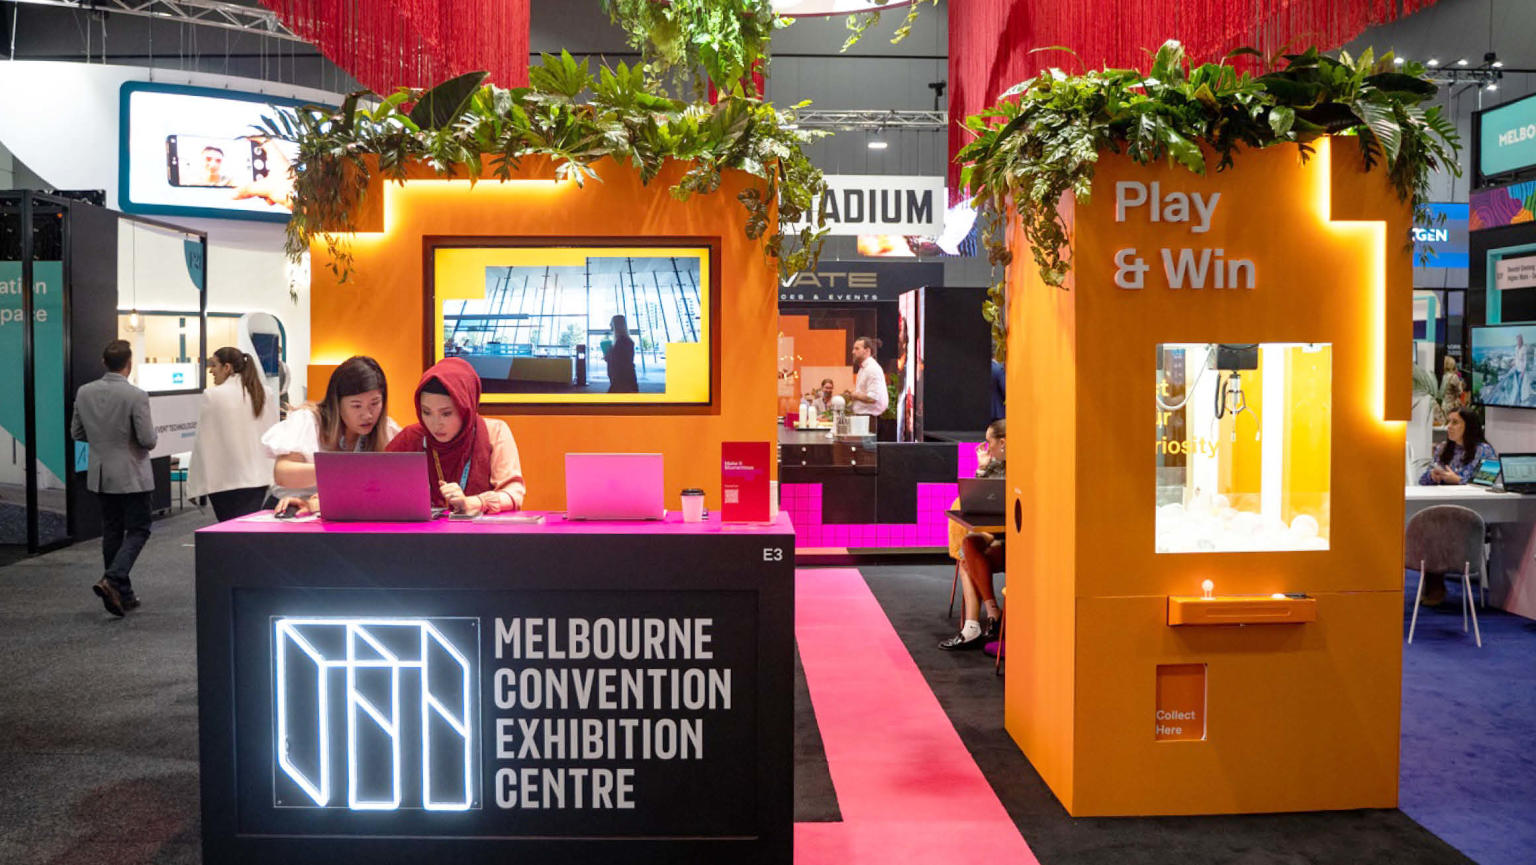 An attention-grabbing exhibition stand with a dynamic arrangement of elements: long red fringing hanging from the ceiling, a vibrant orange wall featuring a walk-through cutout. On the left side, a pink and black table proudly displays a neon logo reading 'Melbourne Convention and Exhibition Centre' with two women standing behind it looking at a laptop screen. To the right, a captivating claw drop game beckons with the enticing words 'Play & Win' above it. 